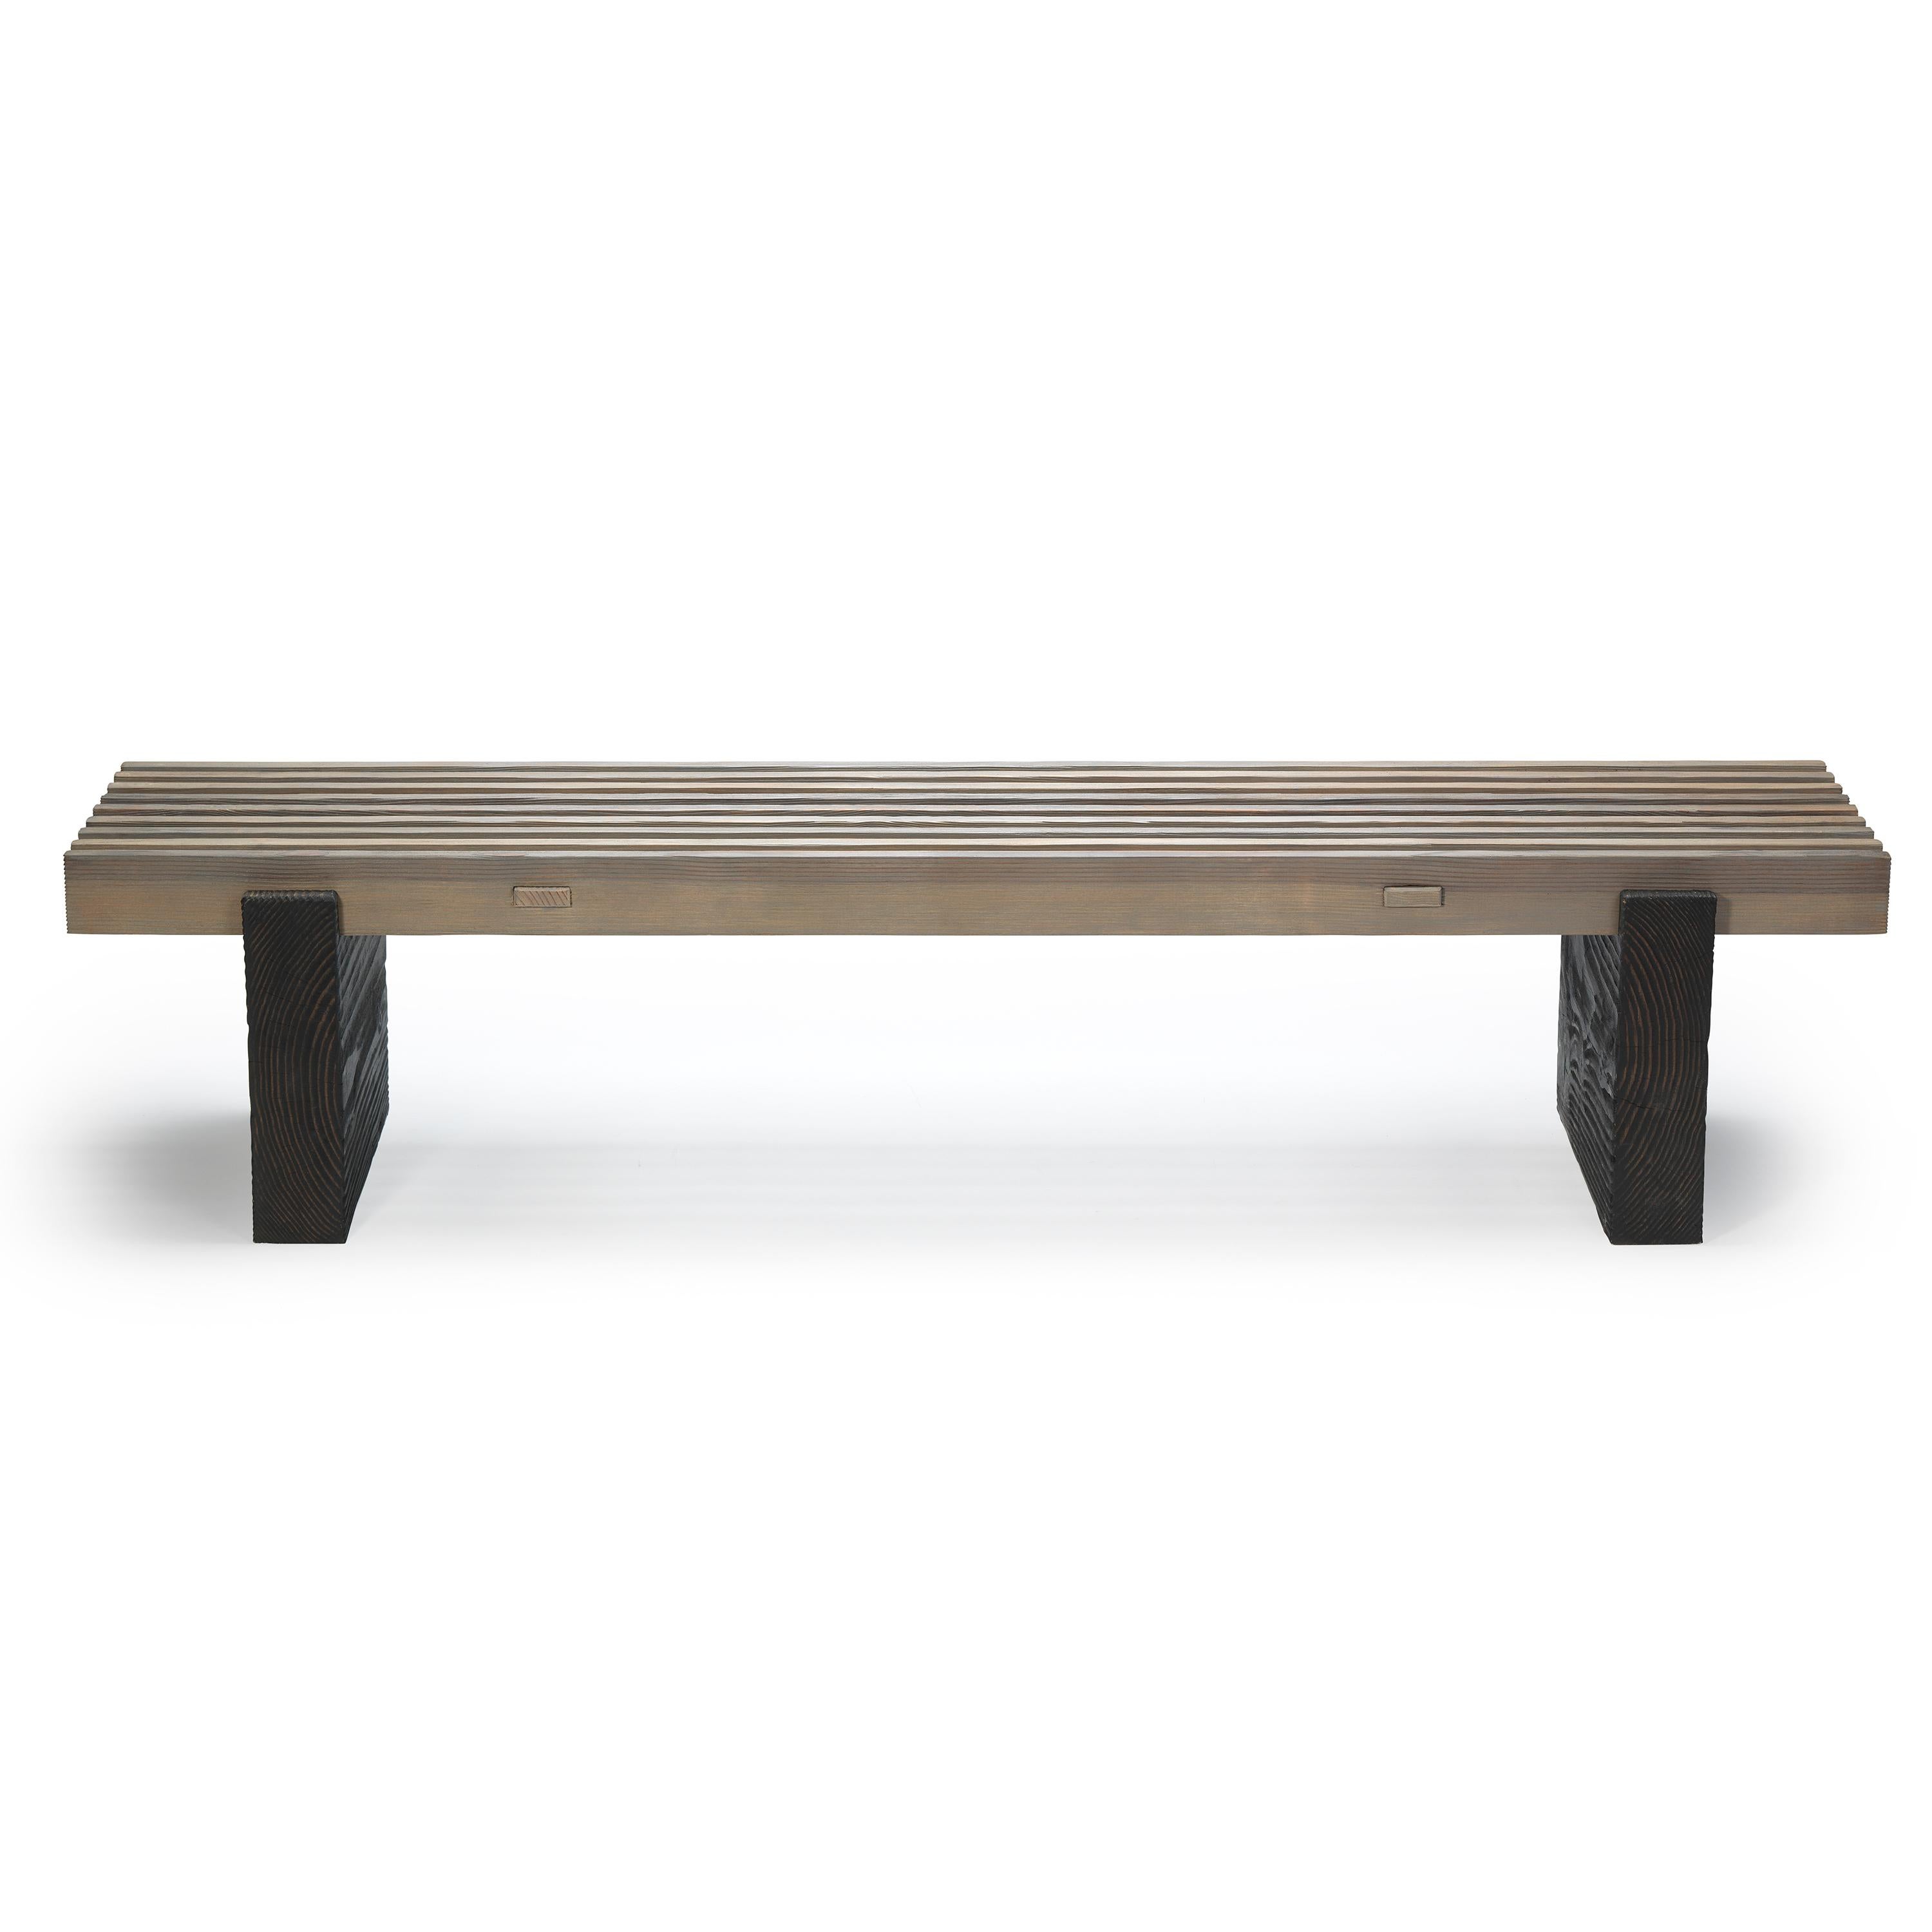 Ten10 Slat Bench made with vertical grain Douglas fir. It is suitable for indoor or outdoor use. The style of this bench is rustic. The legs are darker than the seat slats for subtle contrast. Custom sizes available - lengths up to 8' long. This